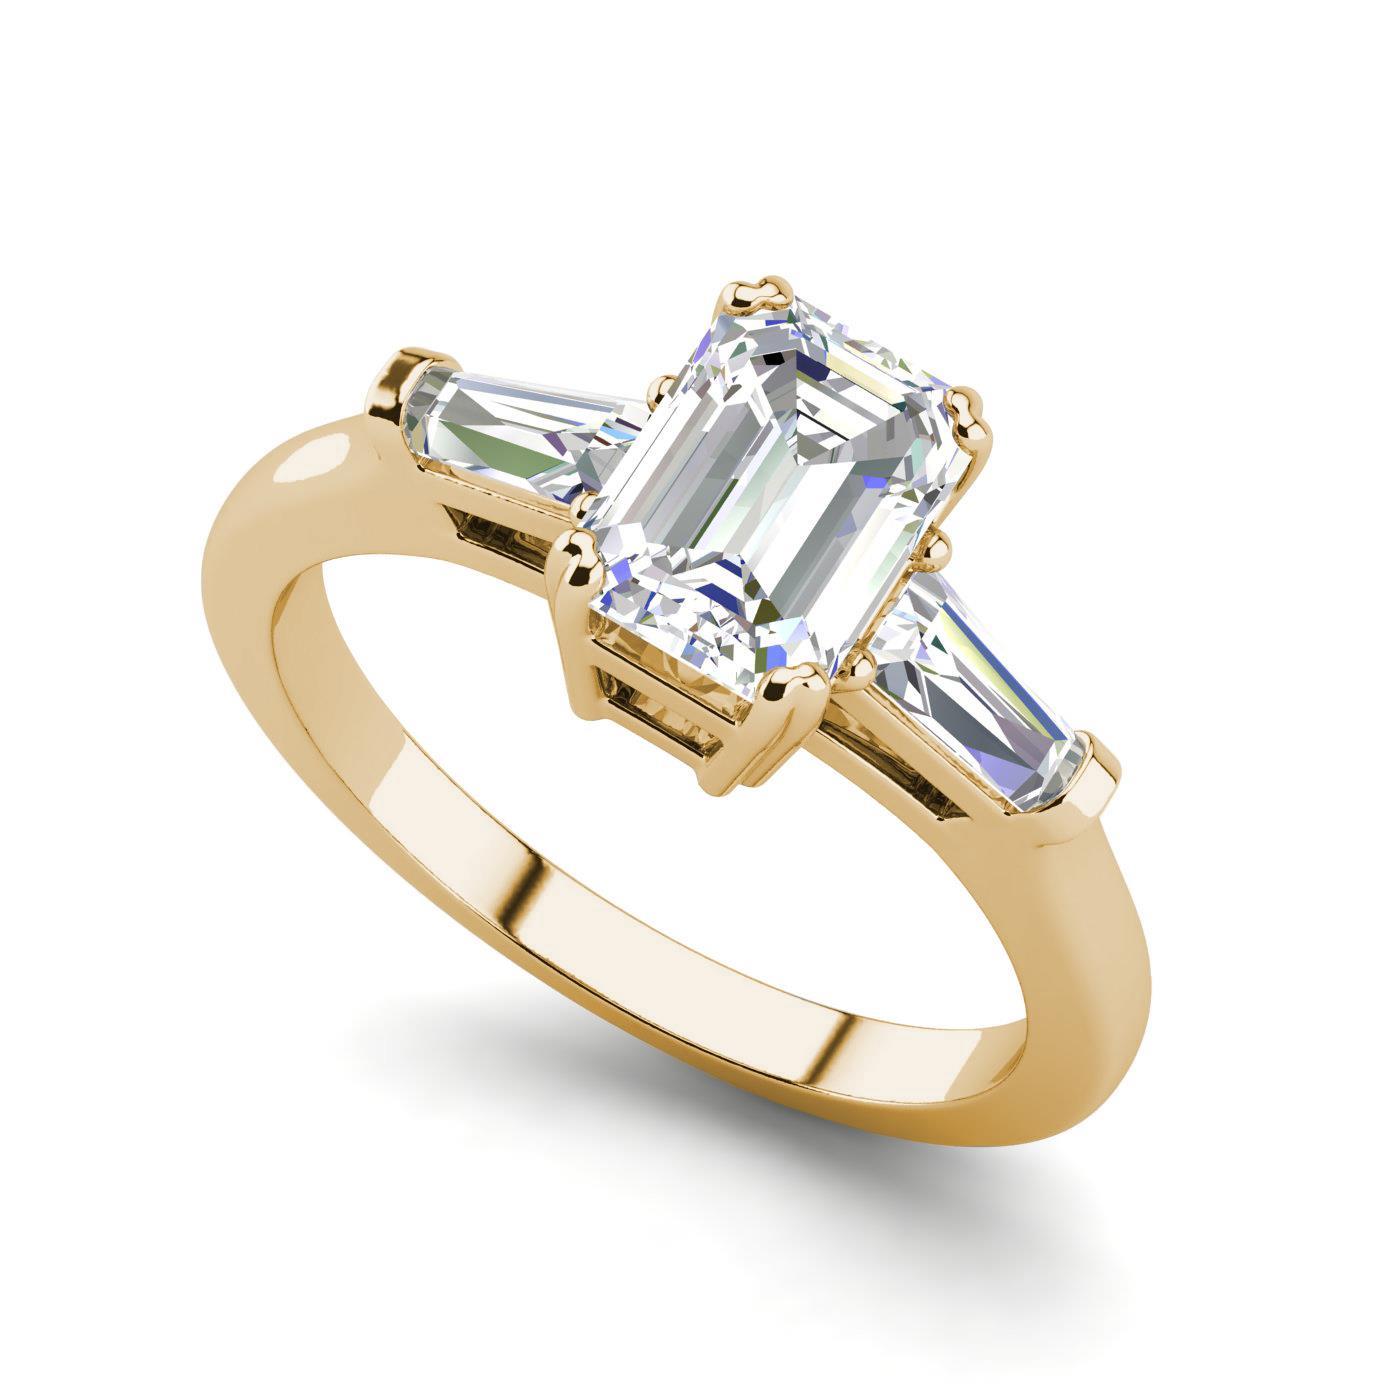 Baguette Accents 2.75 Ct SI1/F Emerald Cut Diamond Engagement Ring ...